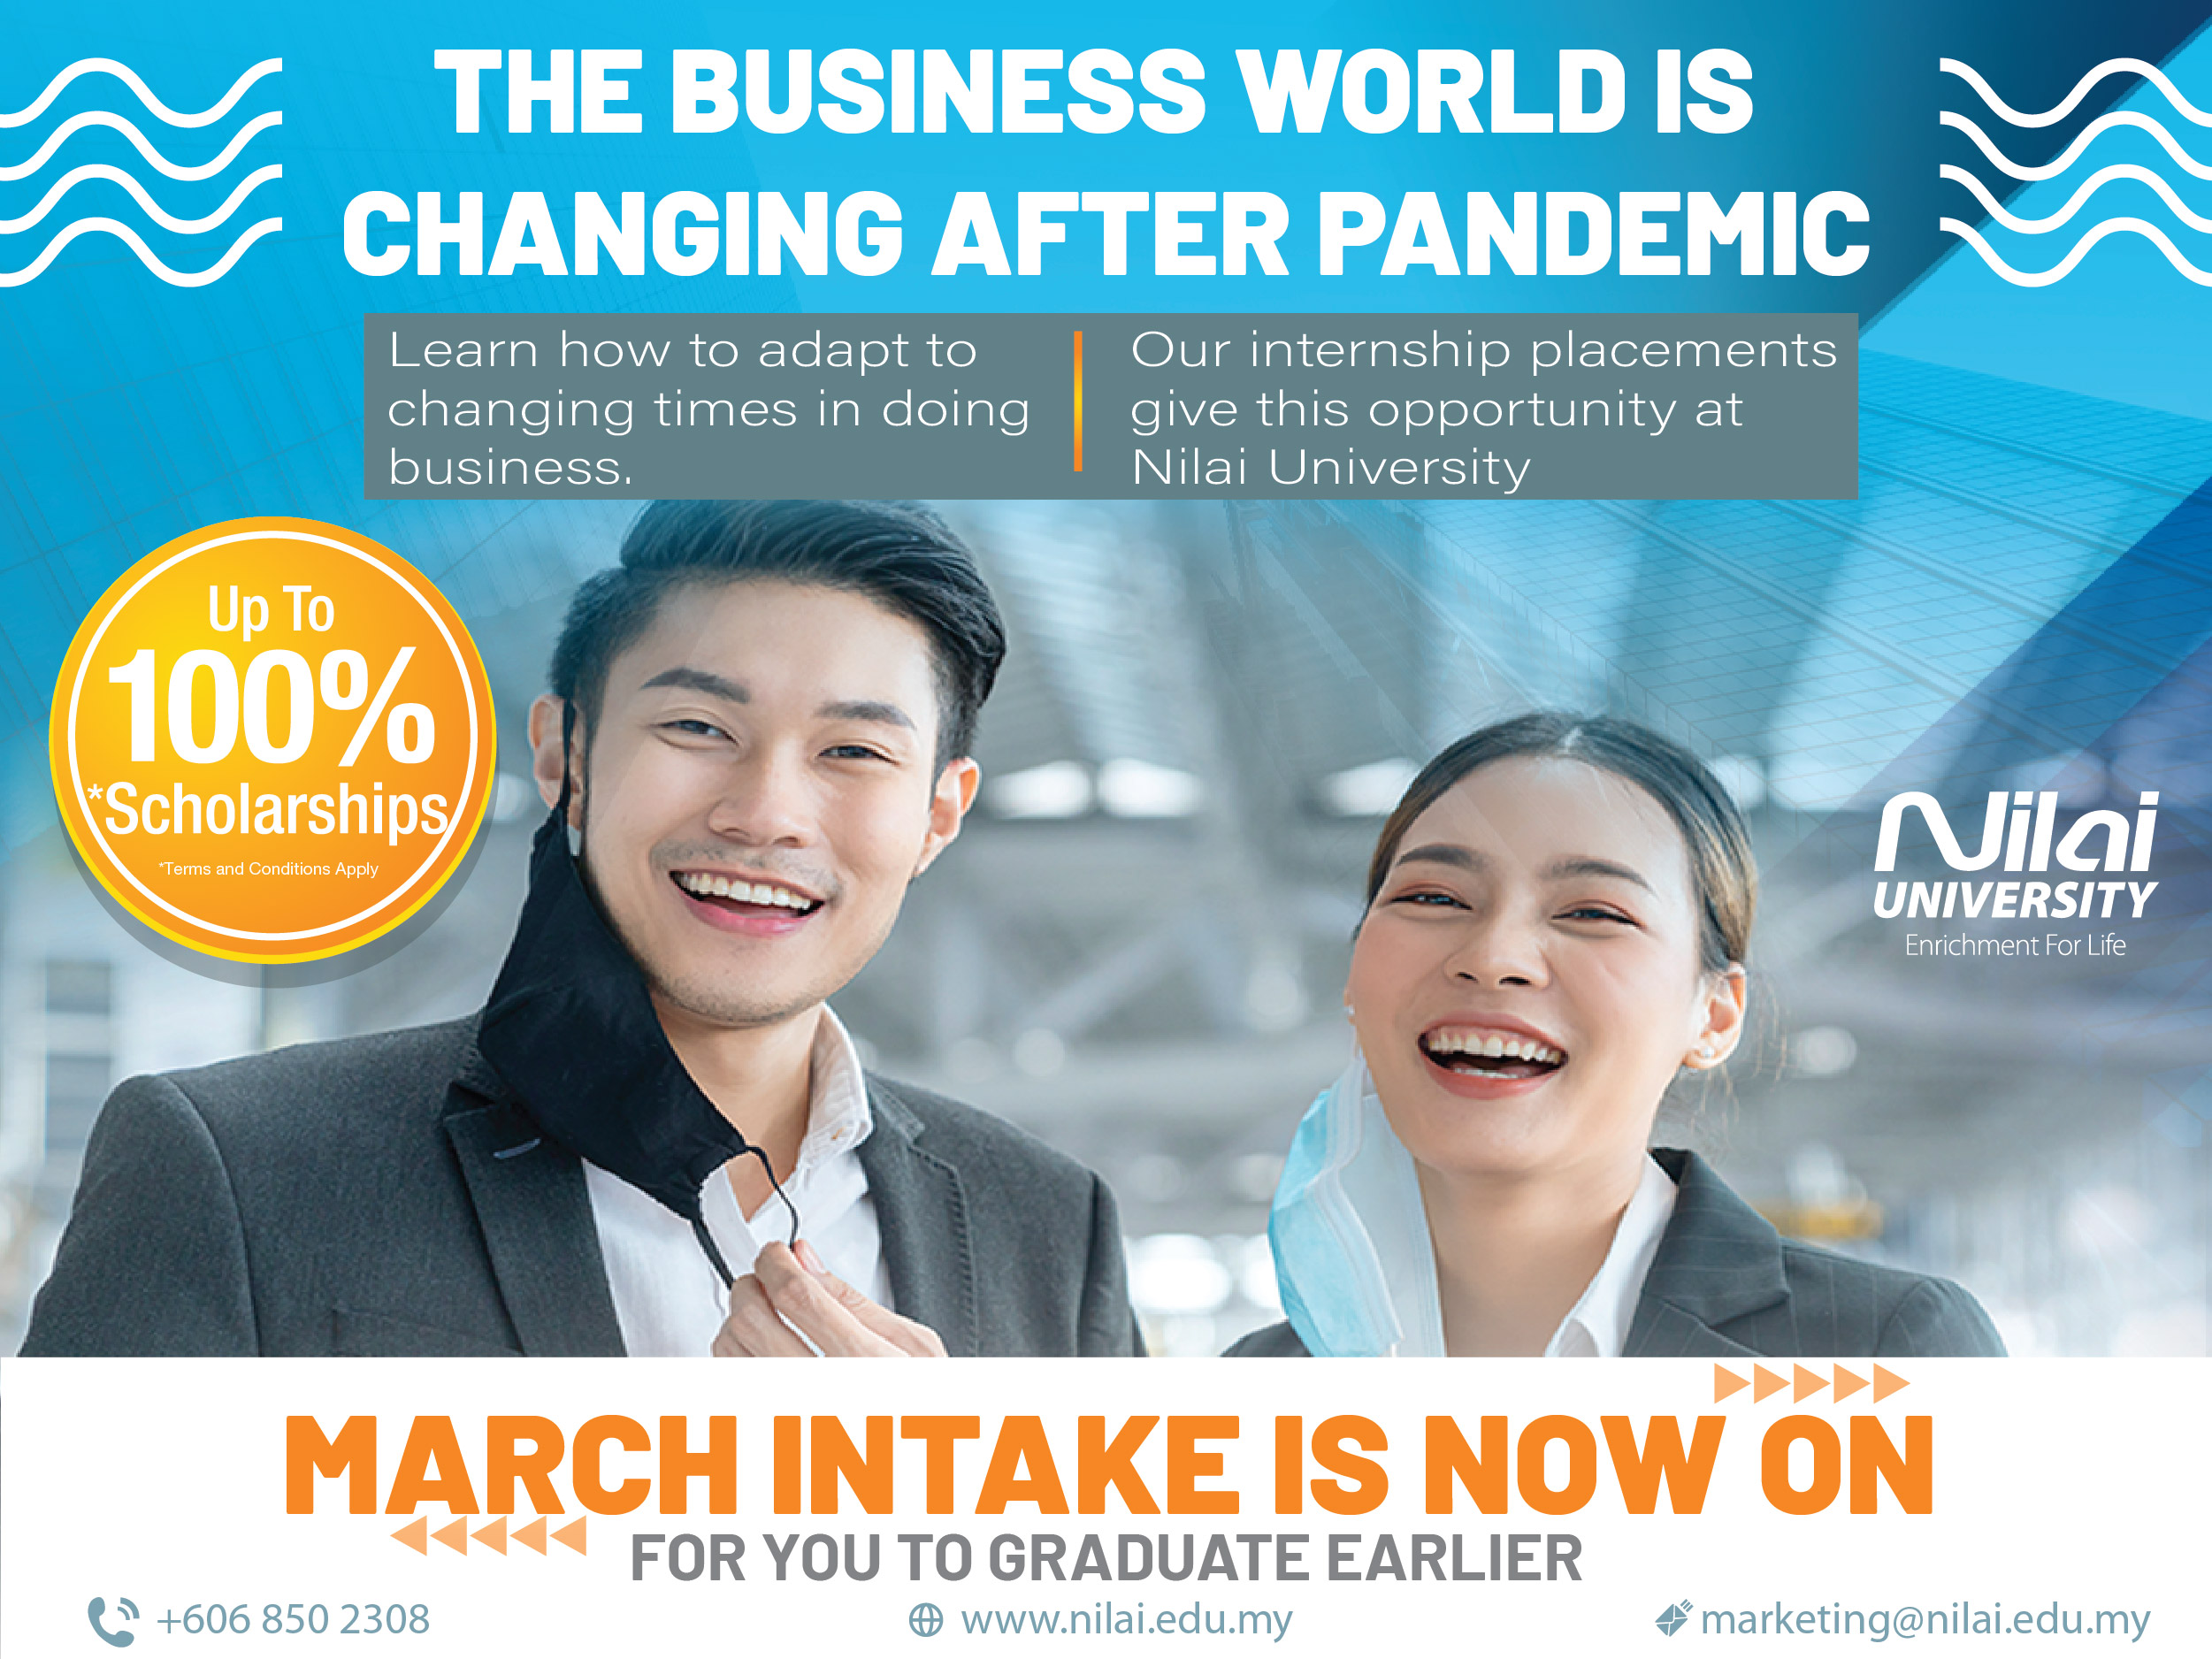 The Business World is Changing After Pandemic